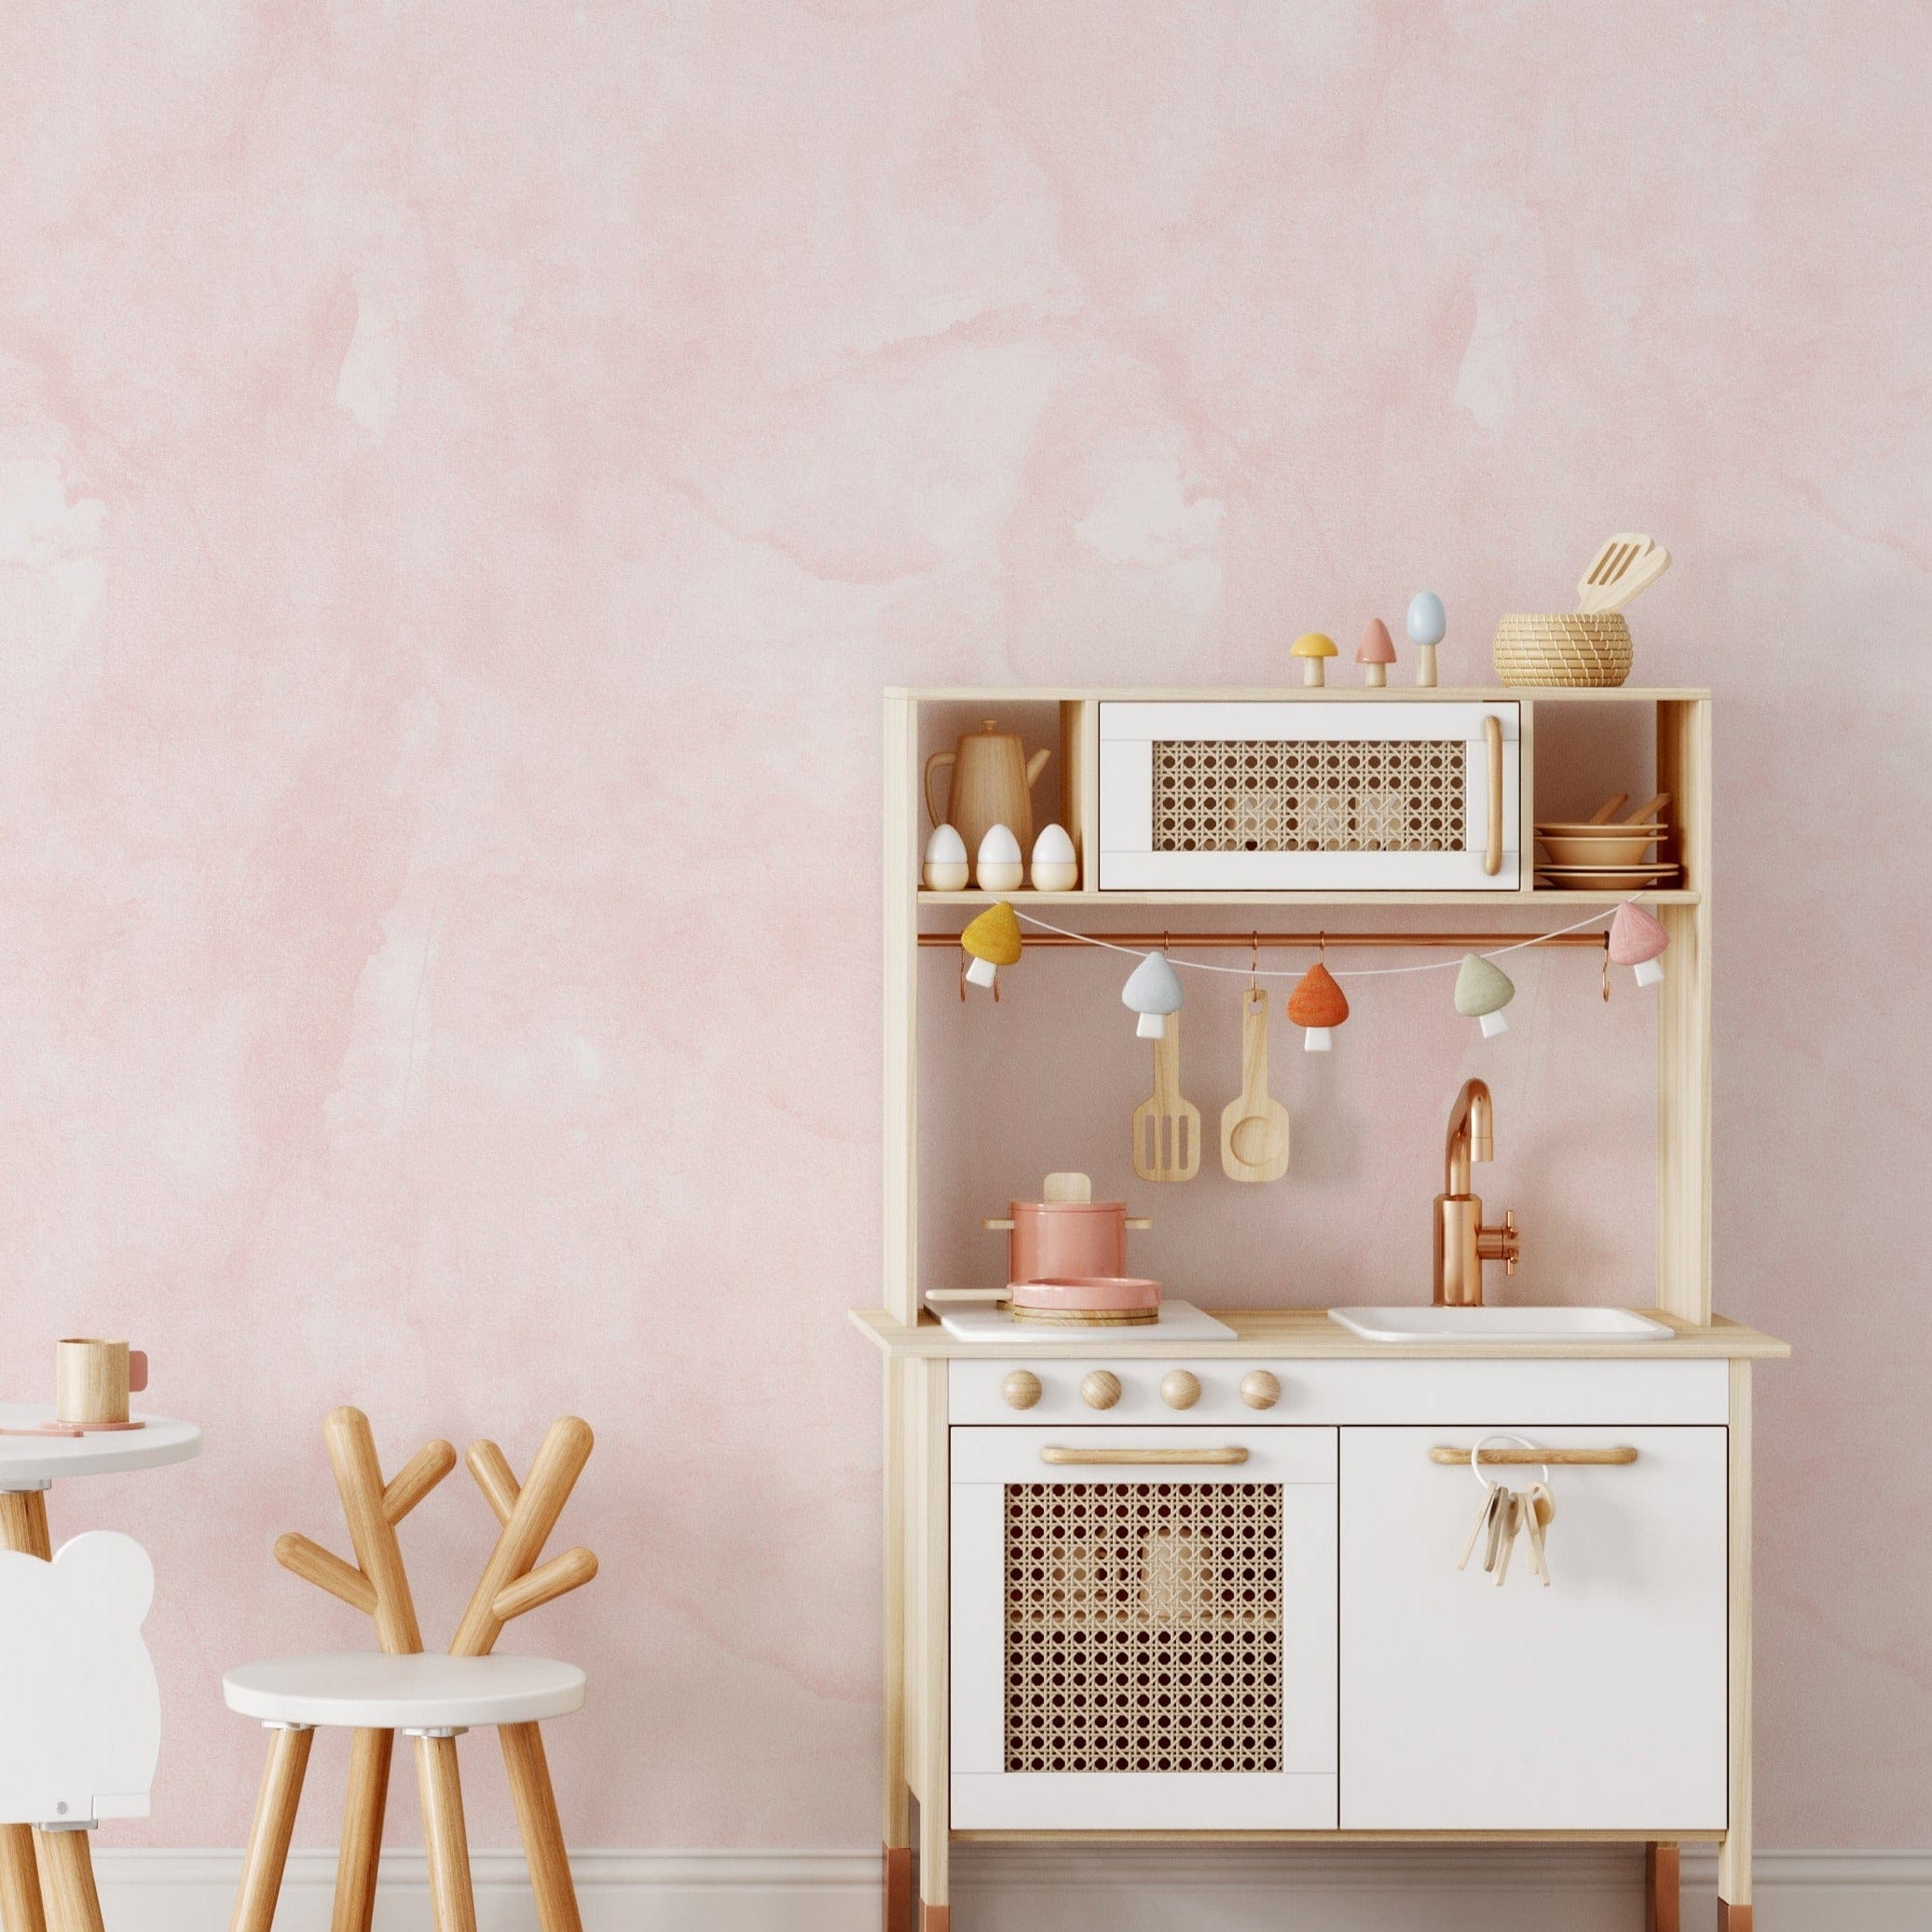 Children's play kitchen set against a wall covered in Kids Lime Wash Wallpaper - Blush Pink. The wallpaper's soft watercolor texture complements the wooden kitchen toys, creating a warm and playful environment